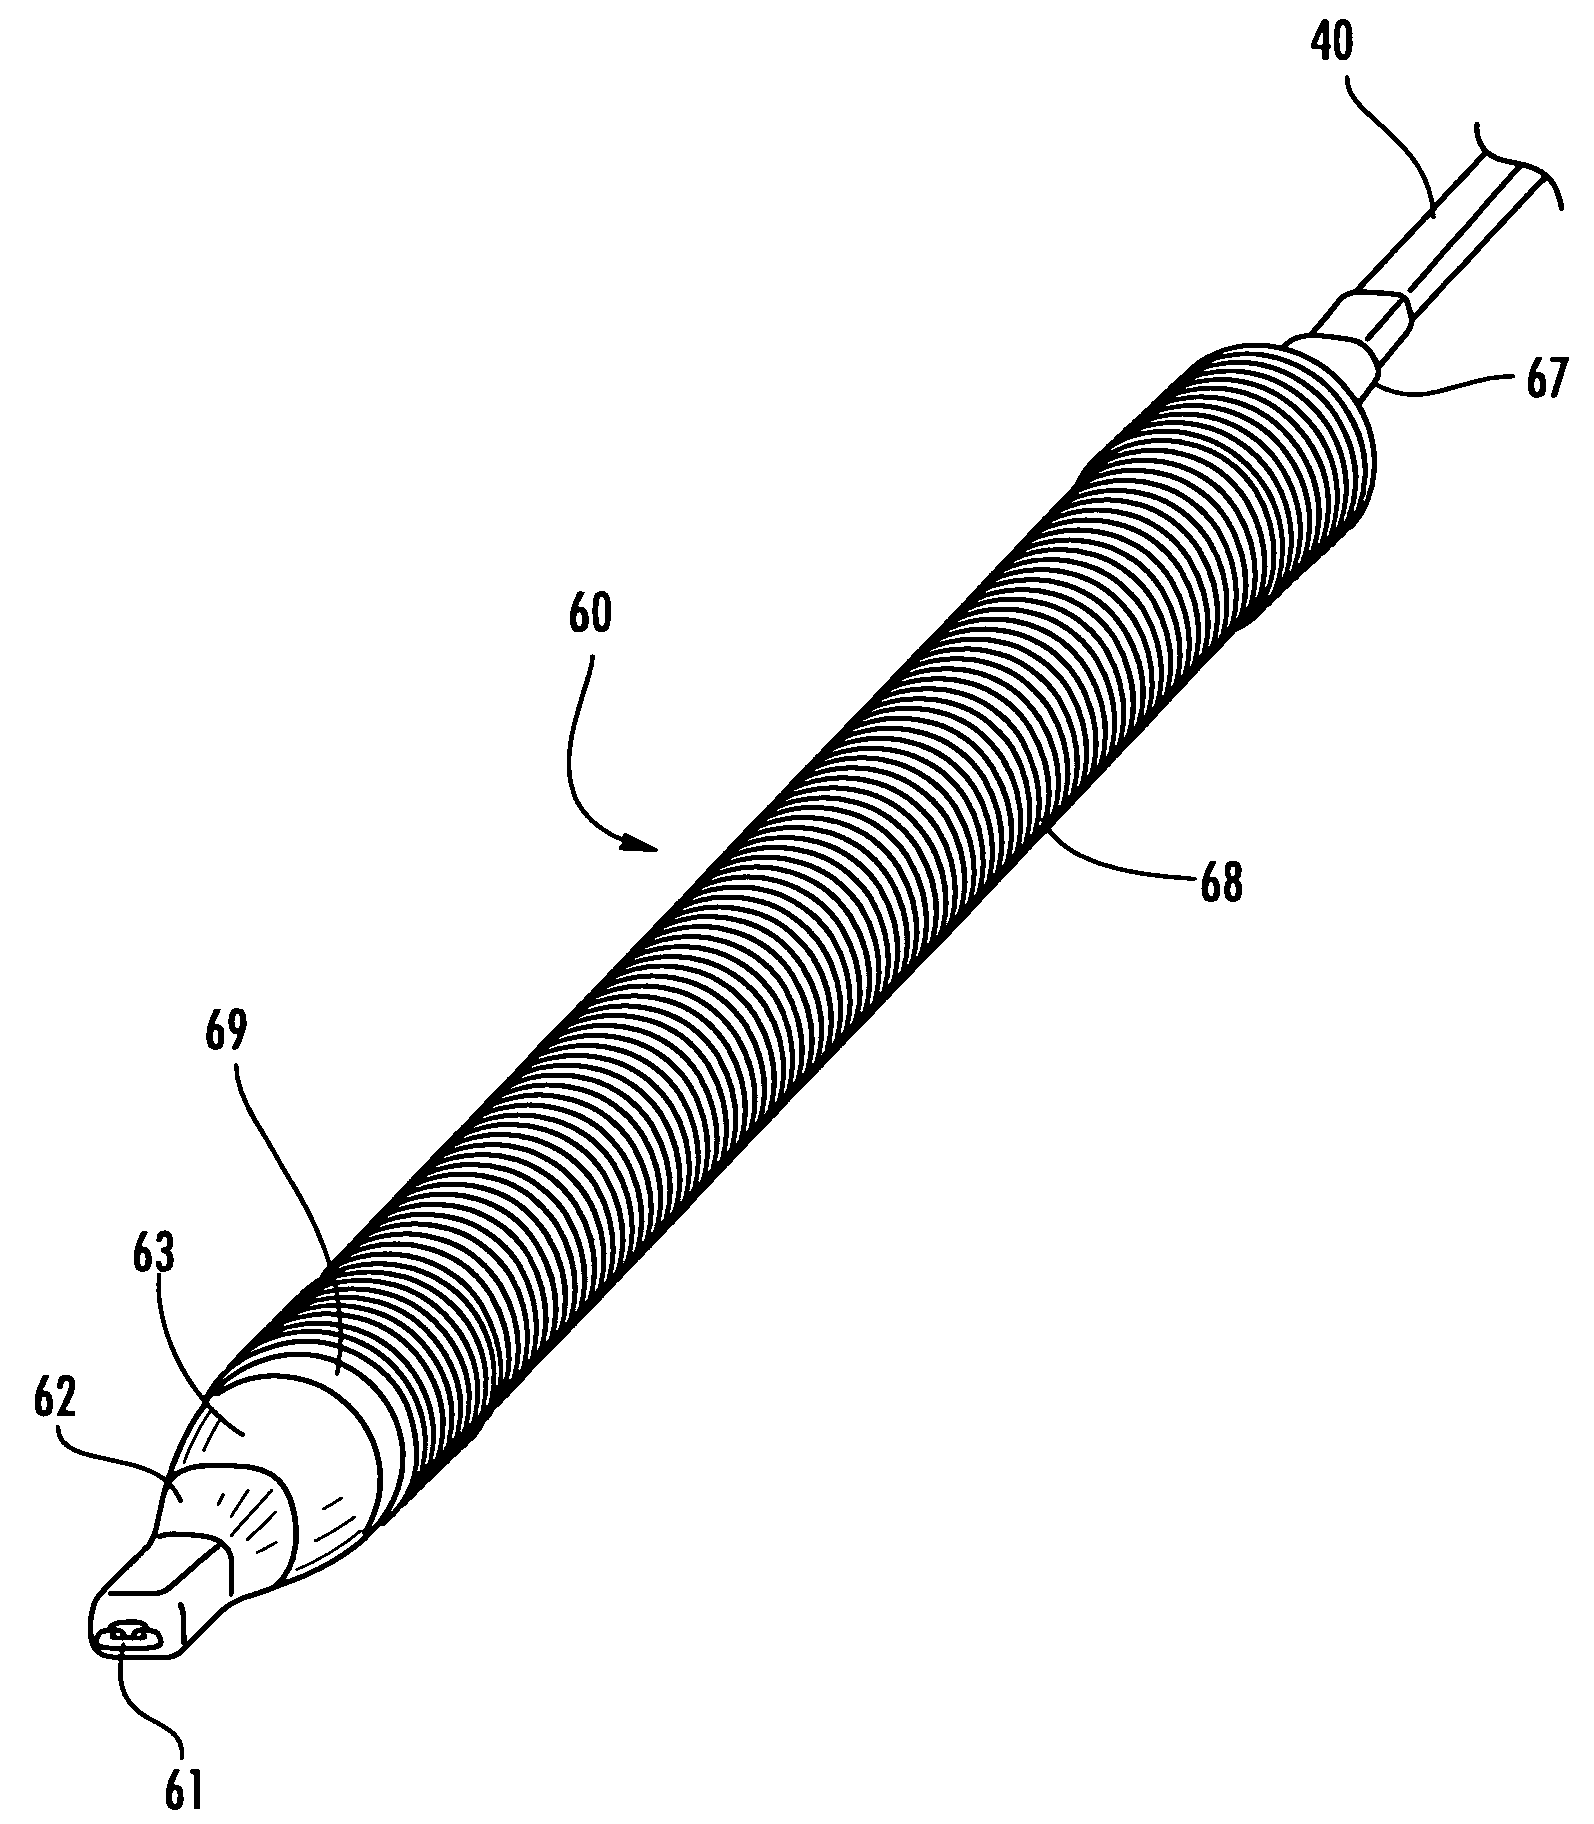 Preconnectorized fiber optic cable assembly